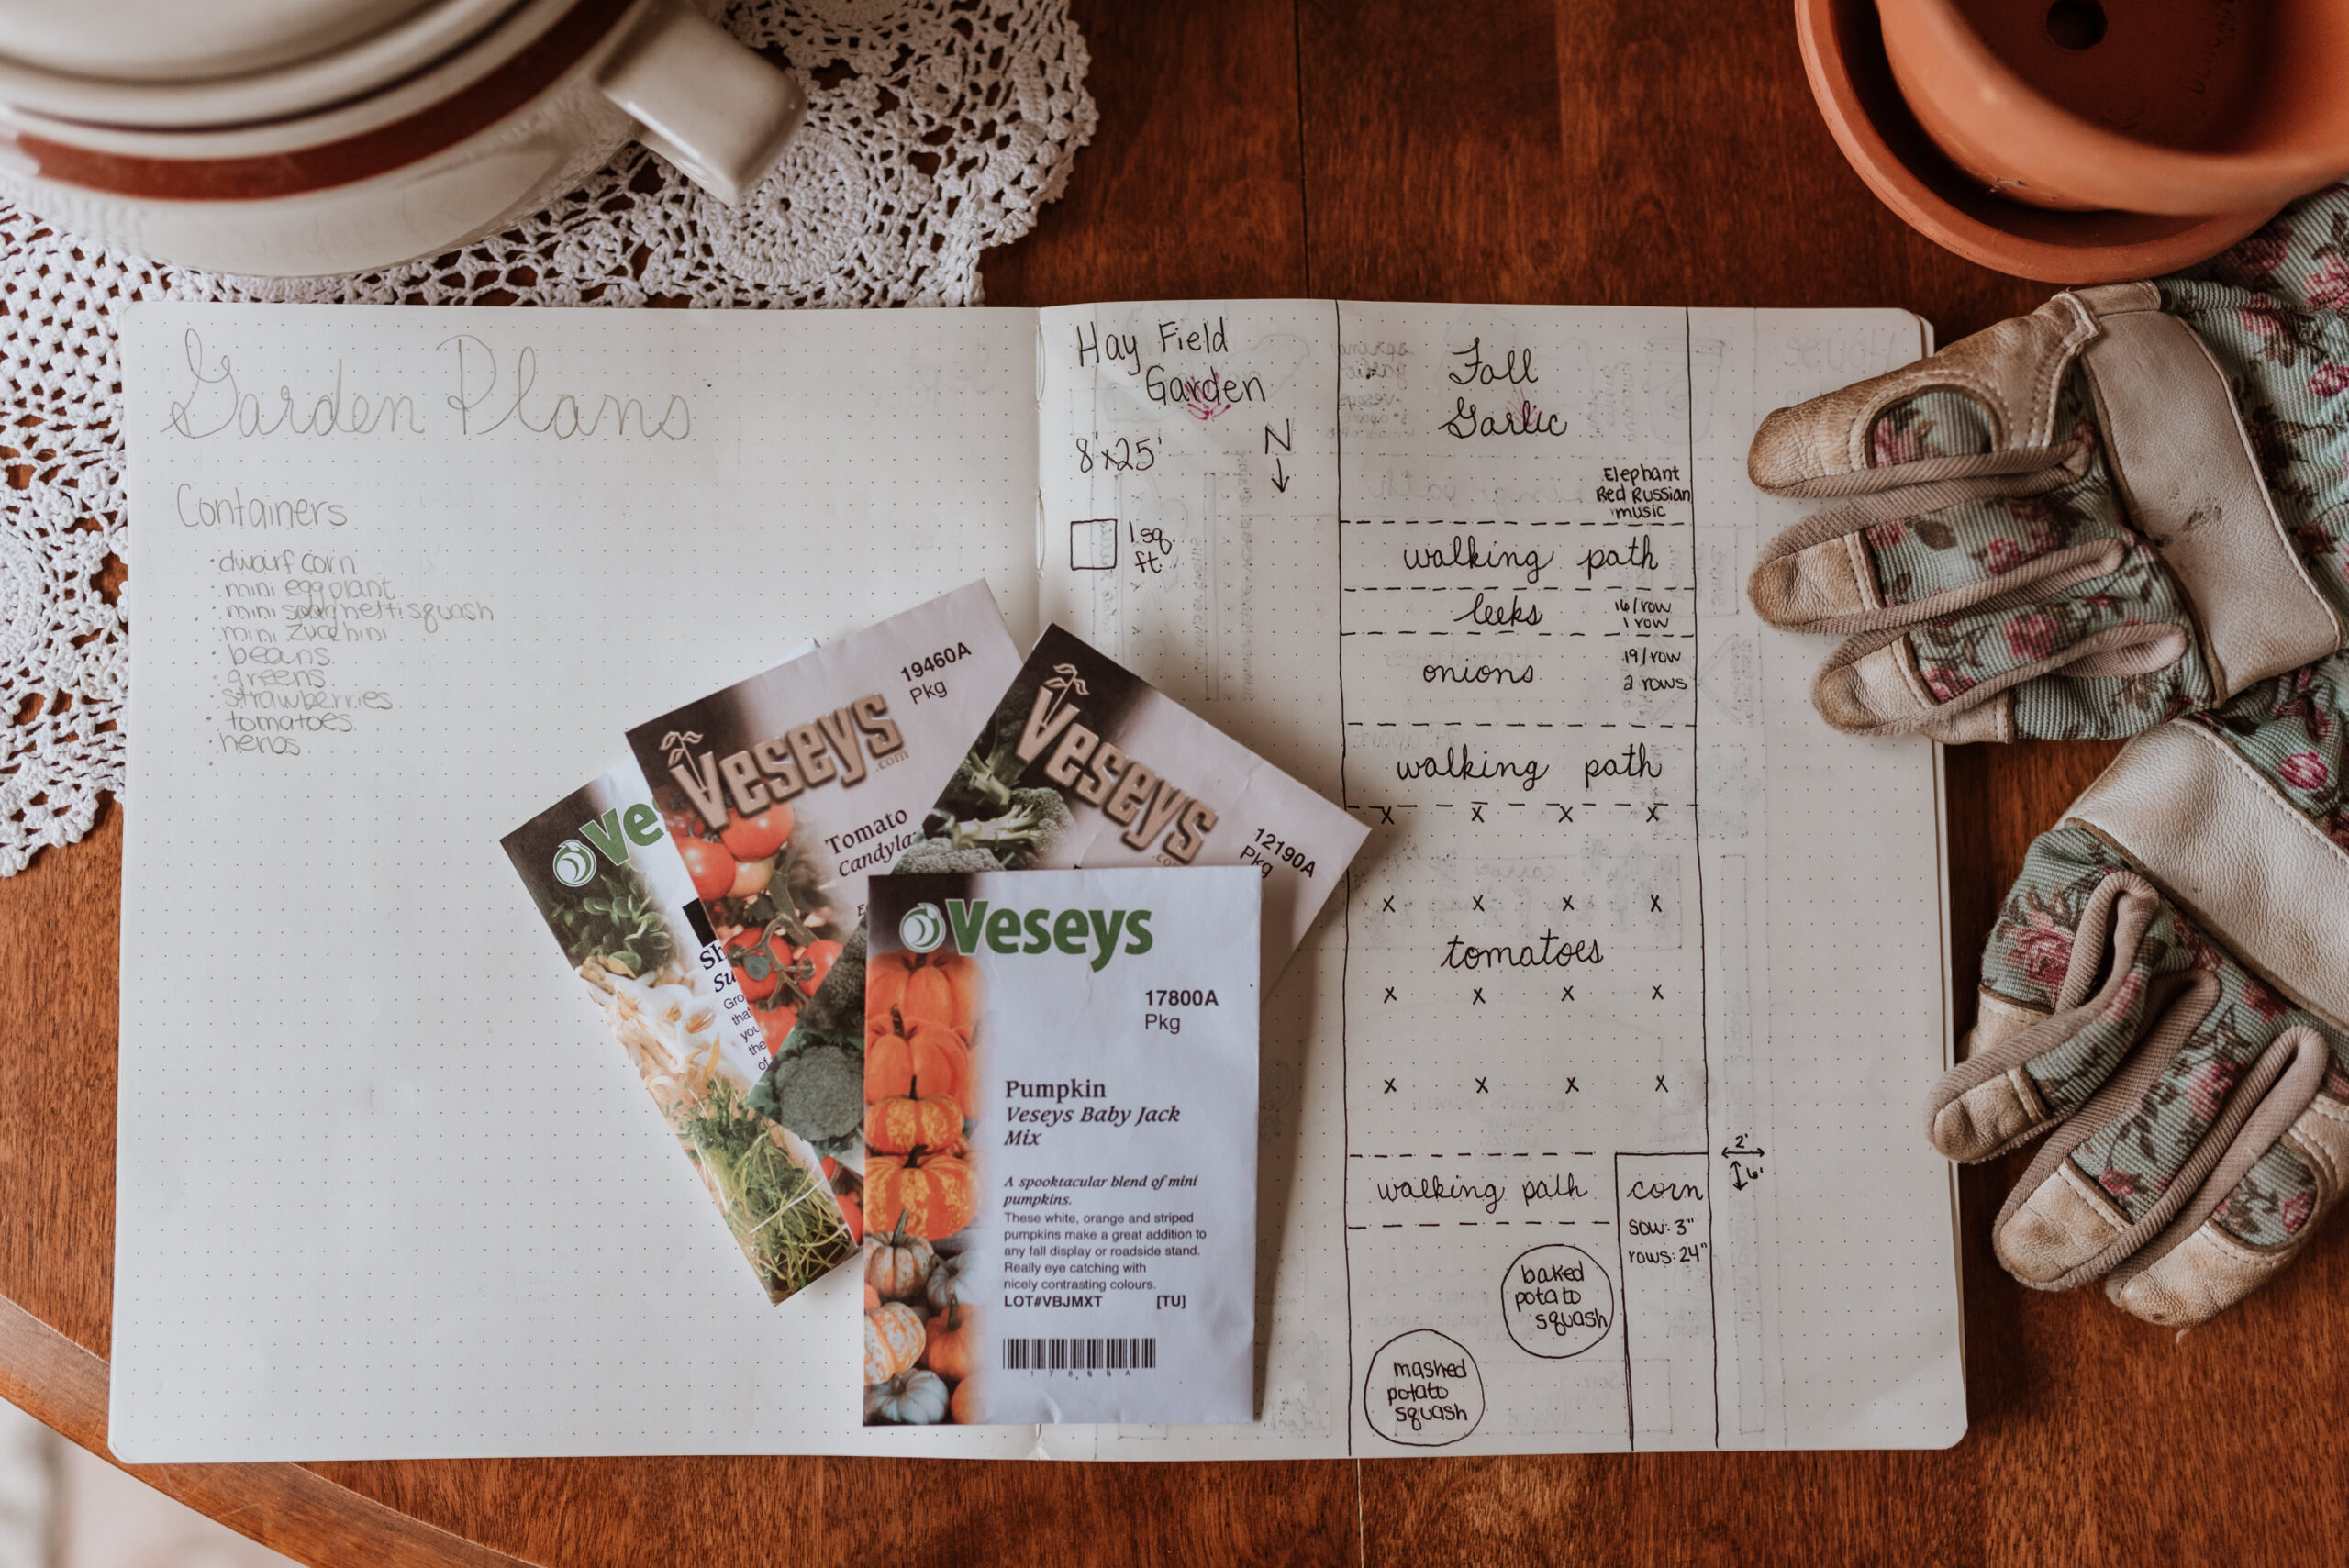 A notebook labeled 'Garden Plans' with seed packets and gardening gloves, outlining a planting strategy.